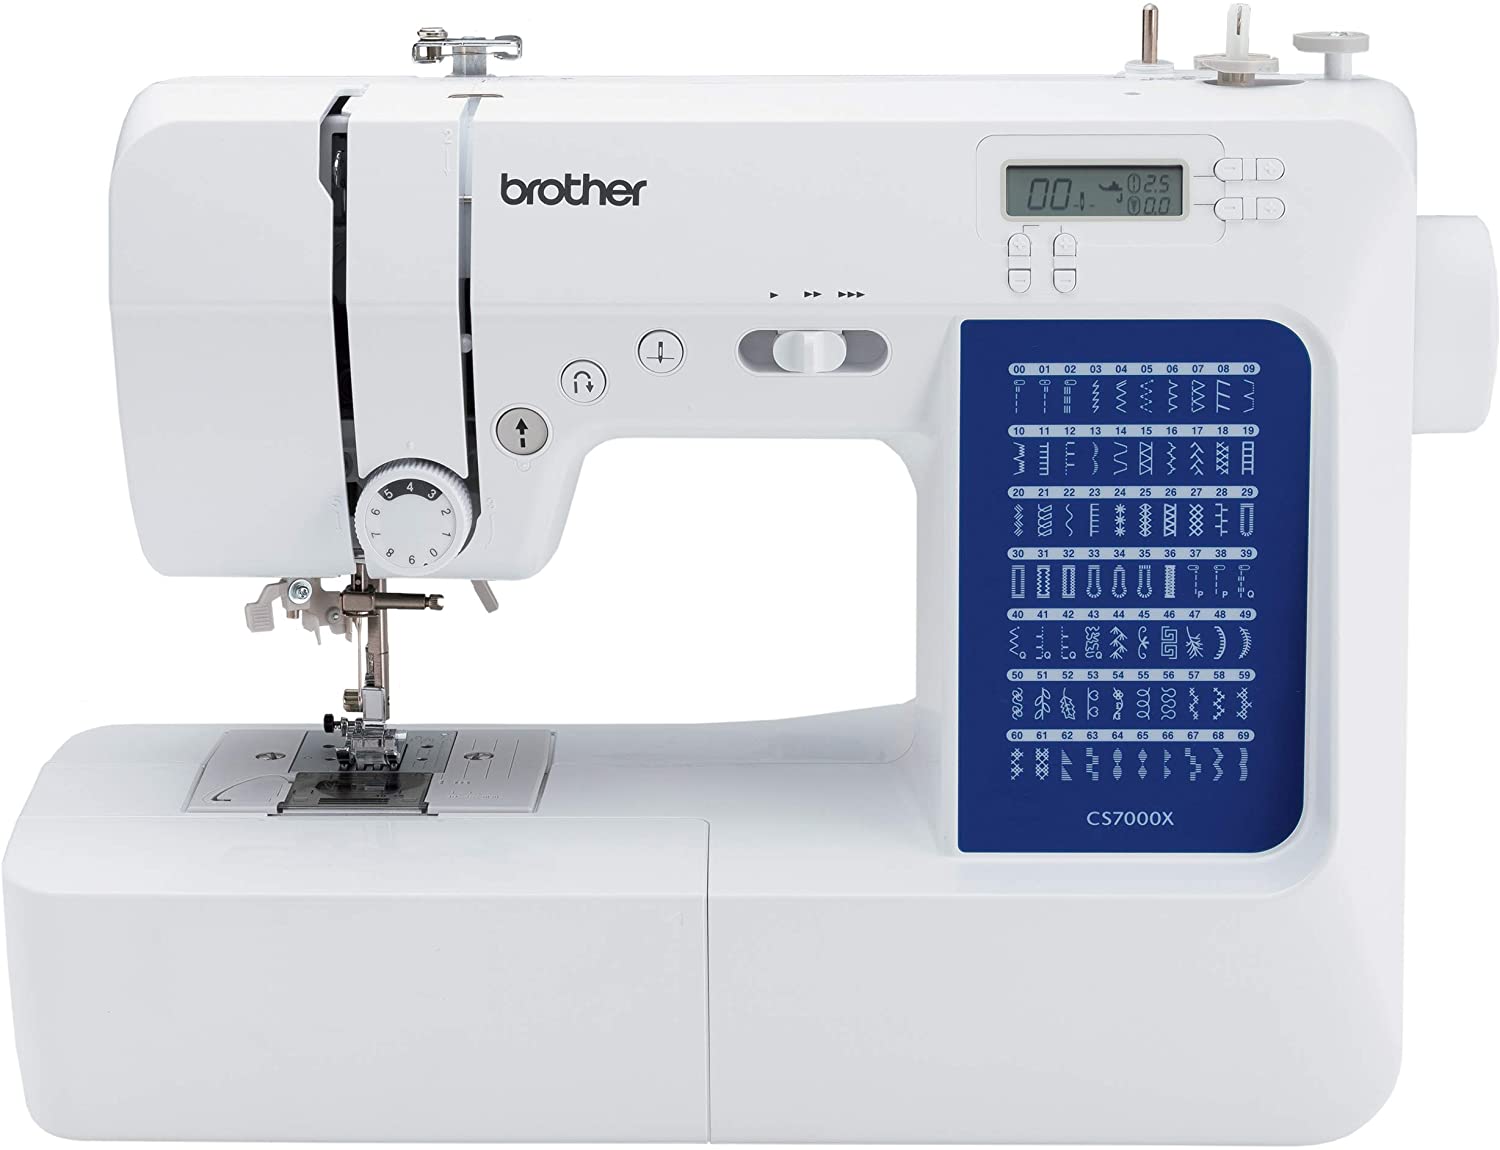 Investing in Brother Sewing Machines is all About Great Quality and Advanced Technology